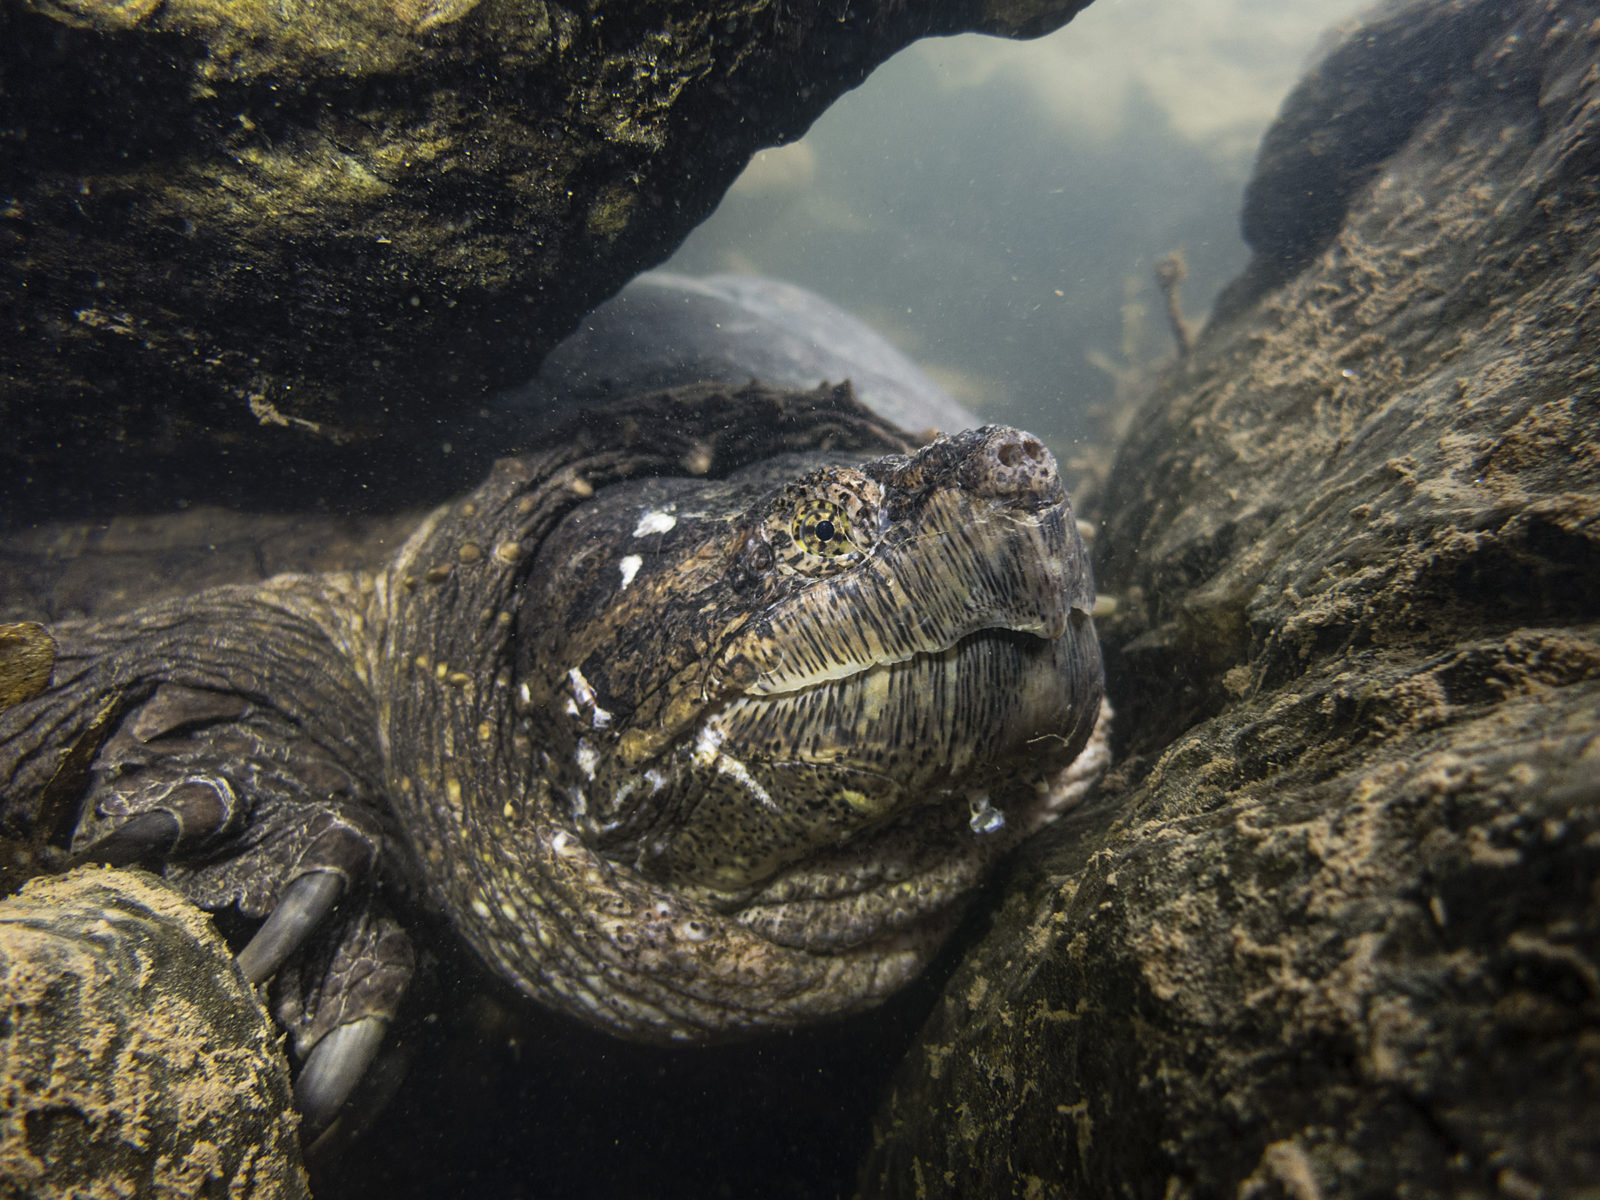 An image of a snapping turtle nestled between rocks underwater; these reptiles only leave the water to change locations, find a mate or lay their eggs